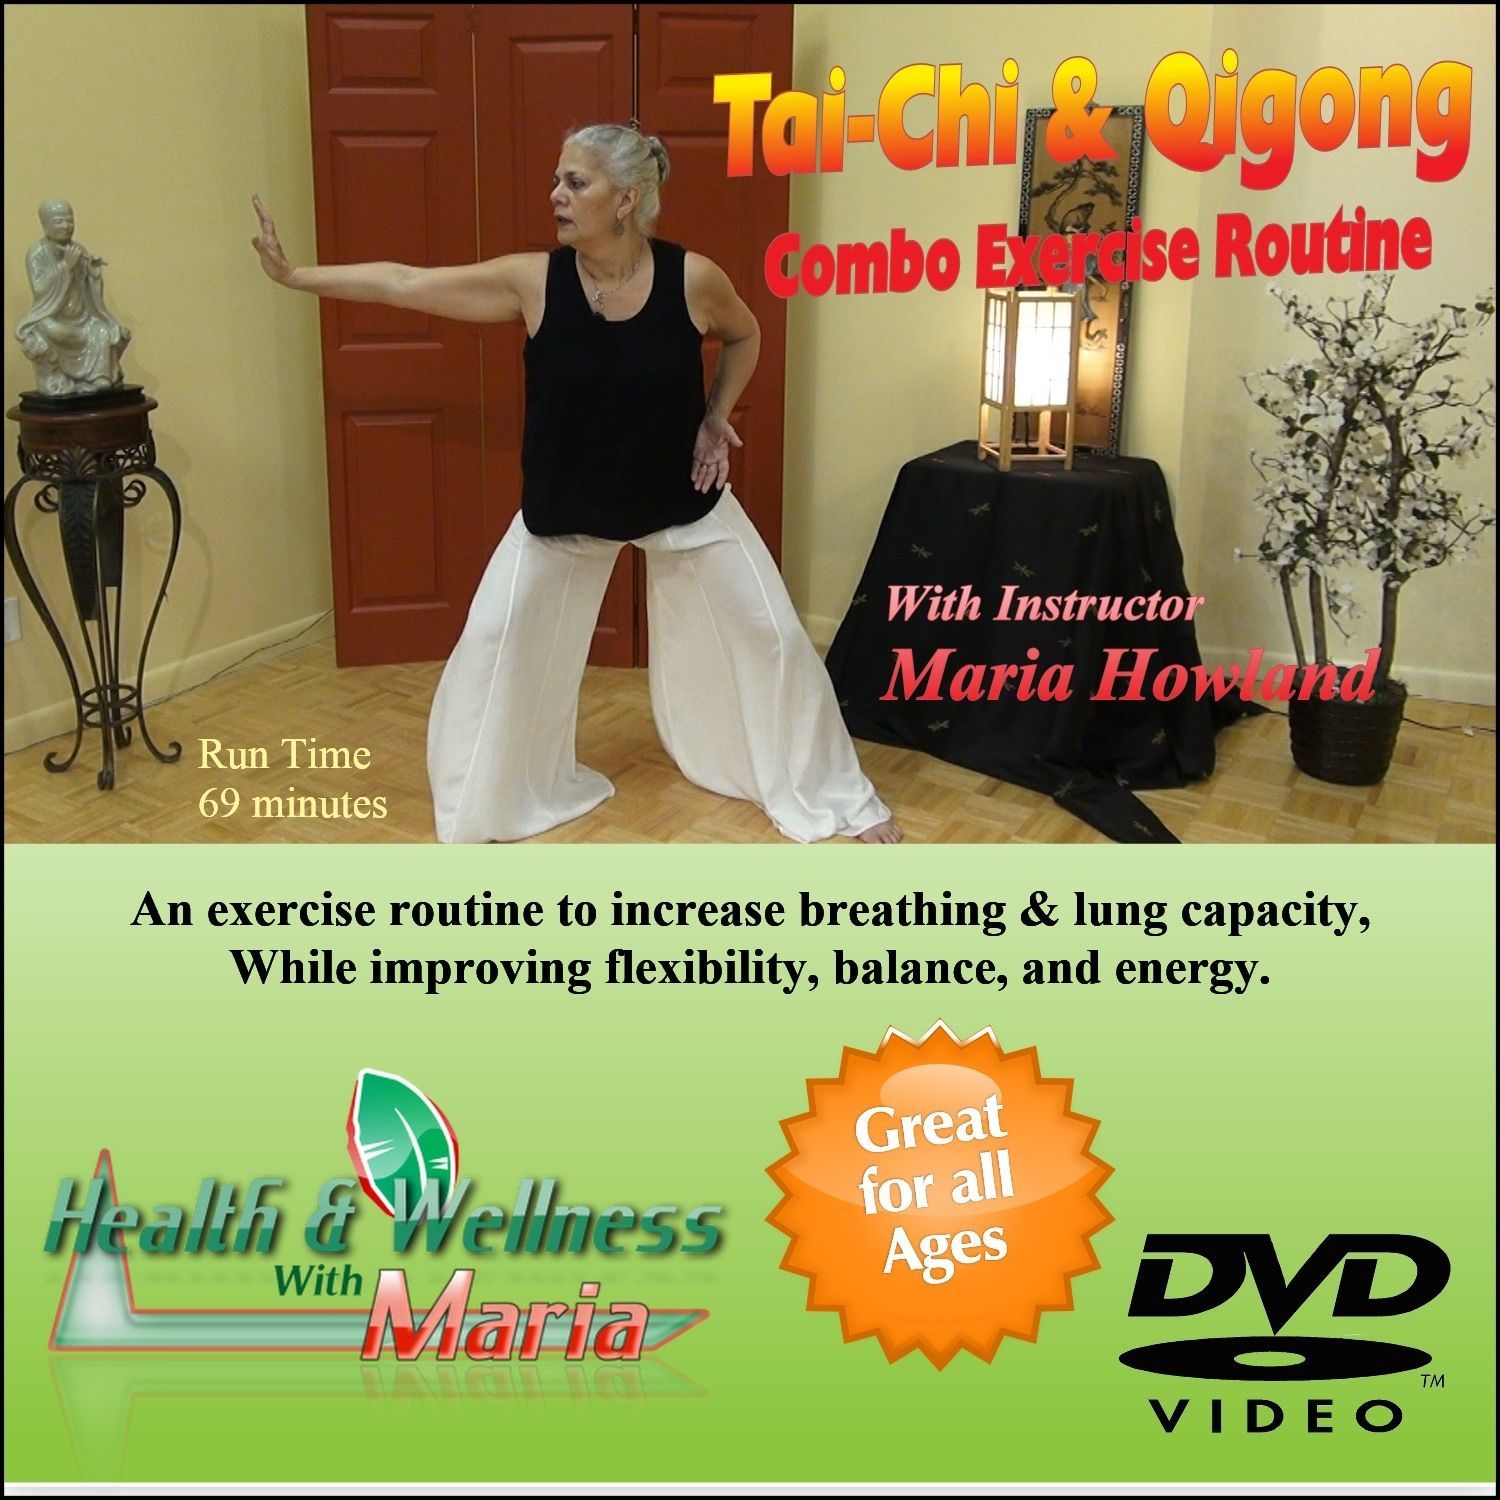 Primary image for "Tai-Chi & Qigong" Easy Exercise Routine, Increase Breathing, & Stamina.  DVD